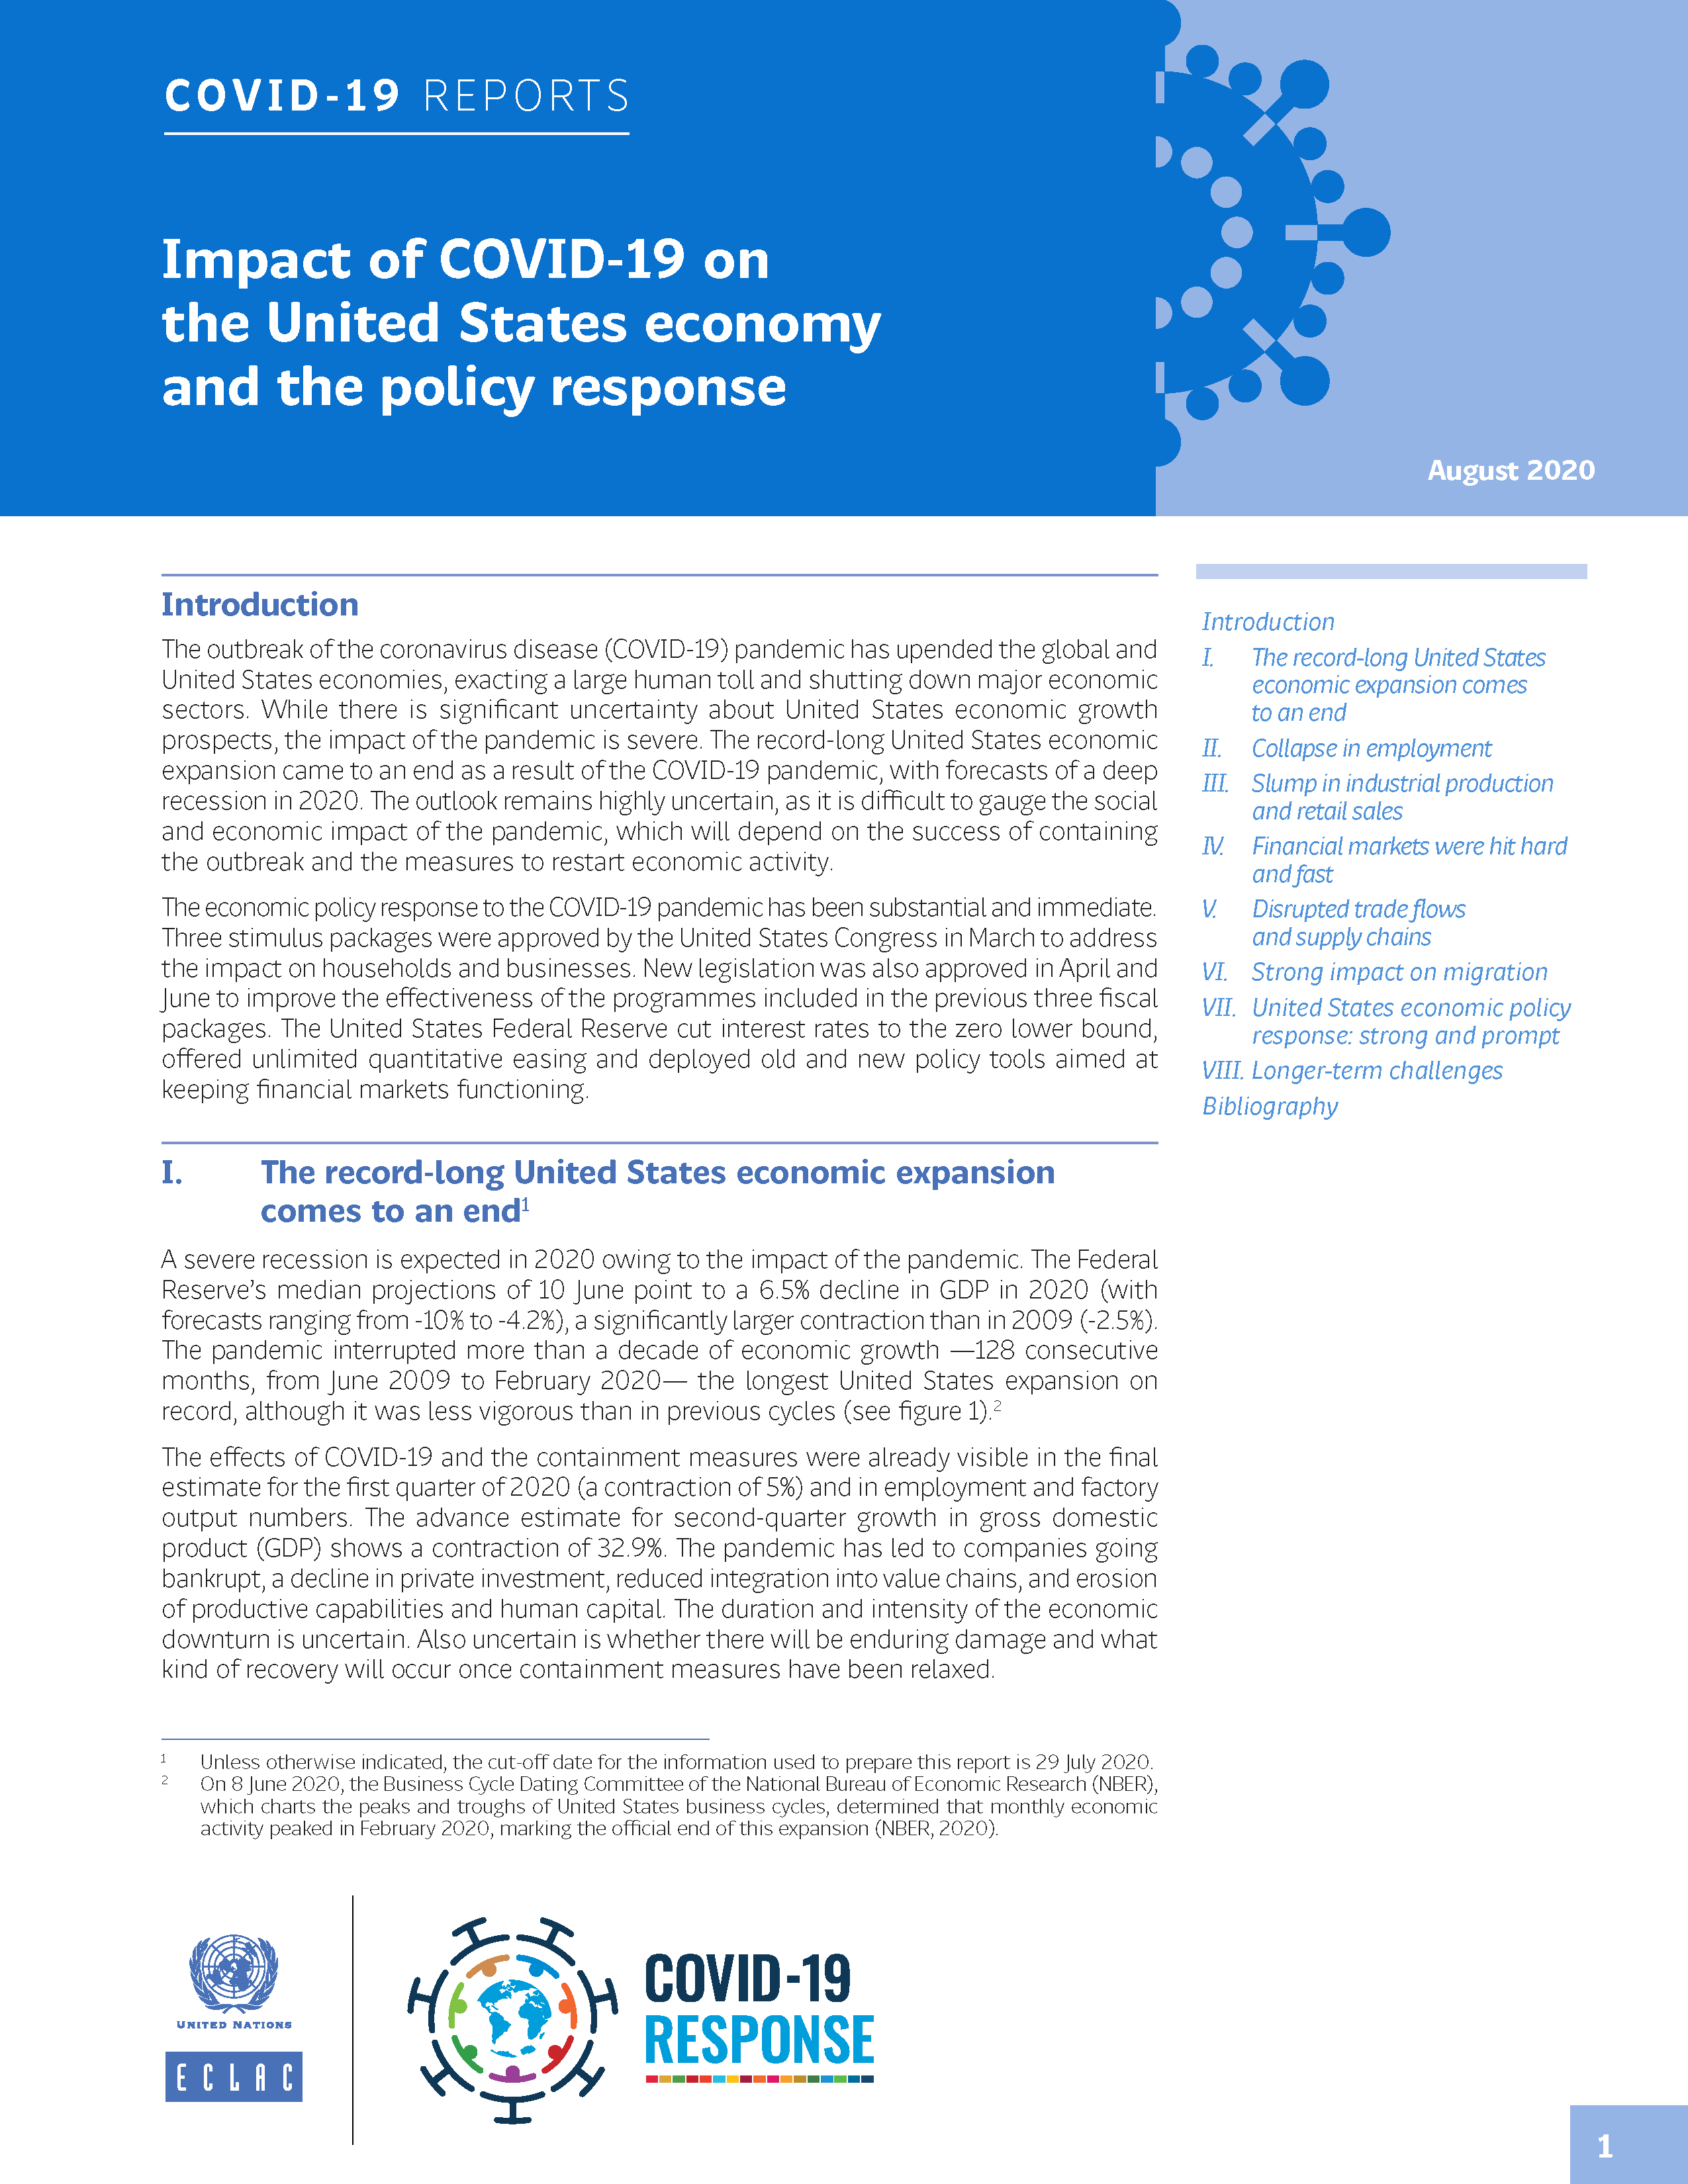 image of Impact of COVID-19 on the United States Economy and the Policy Response